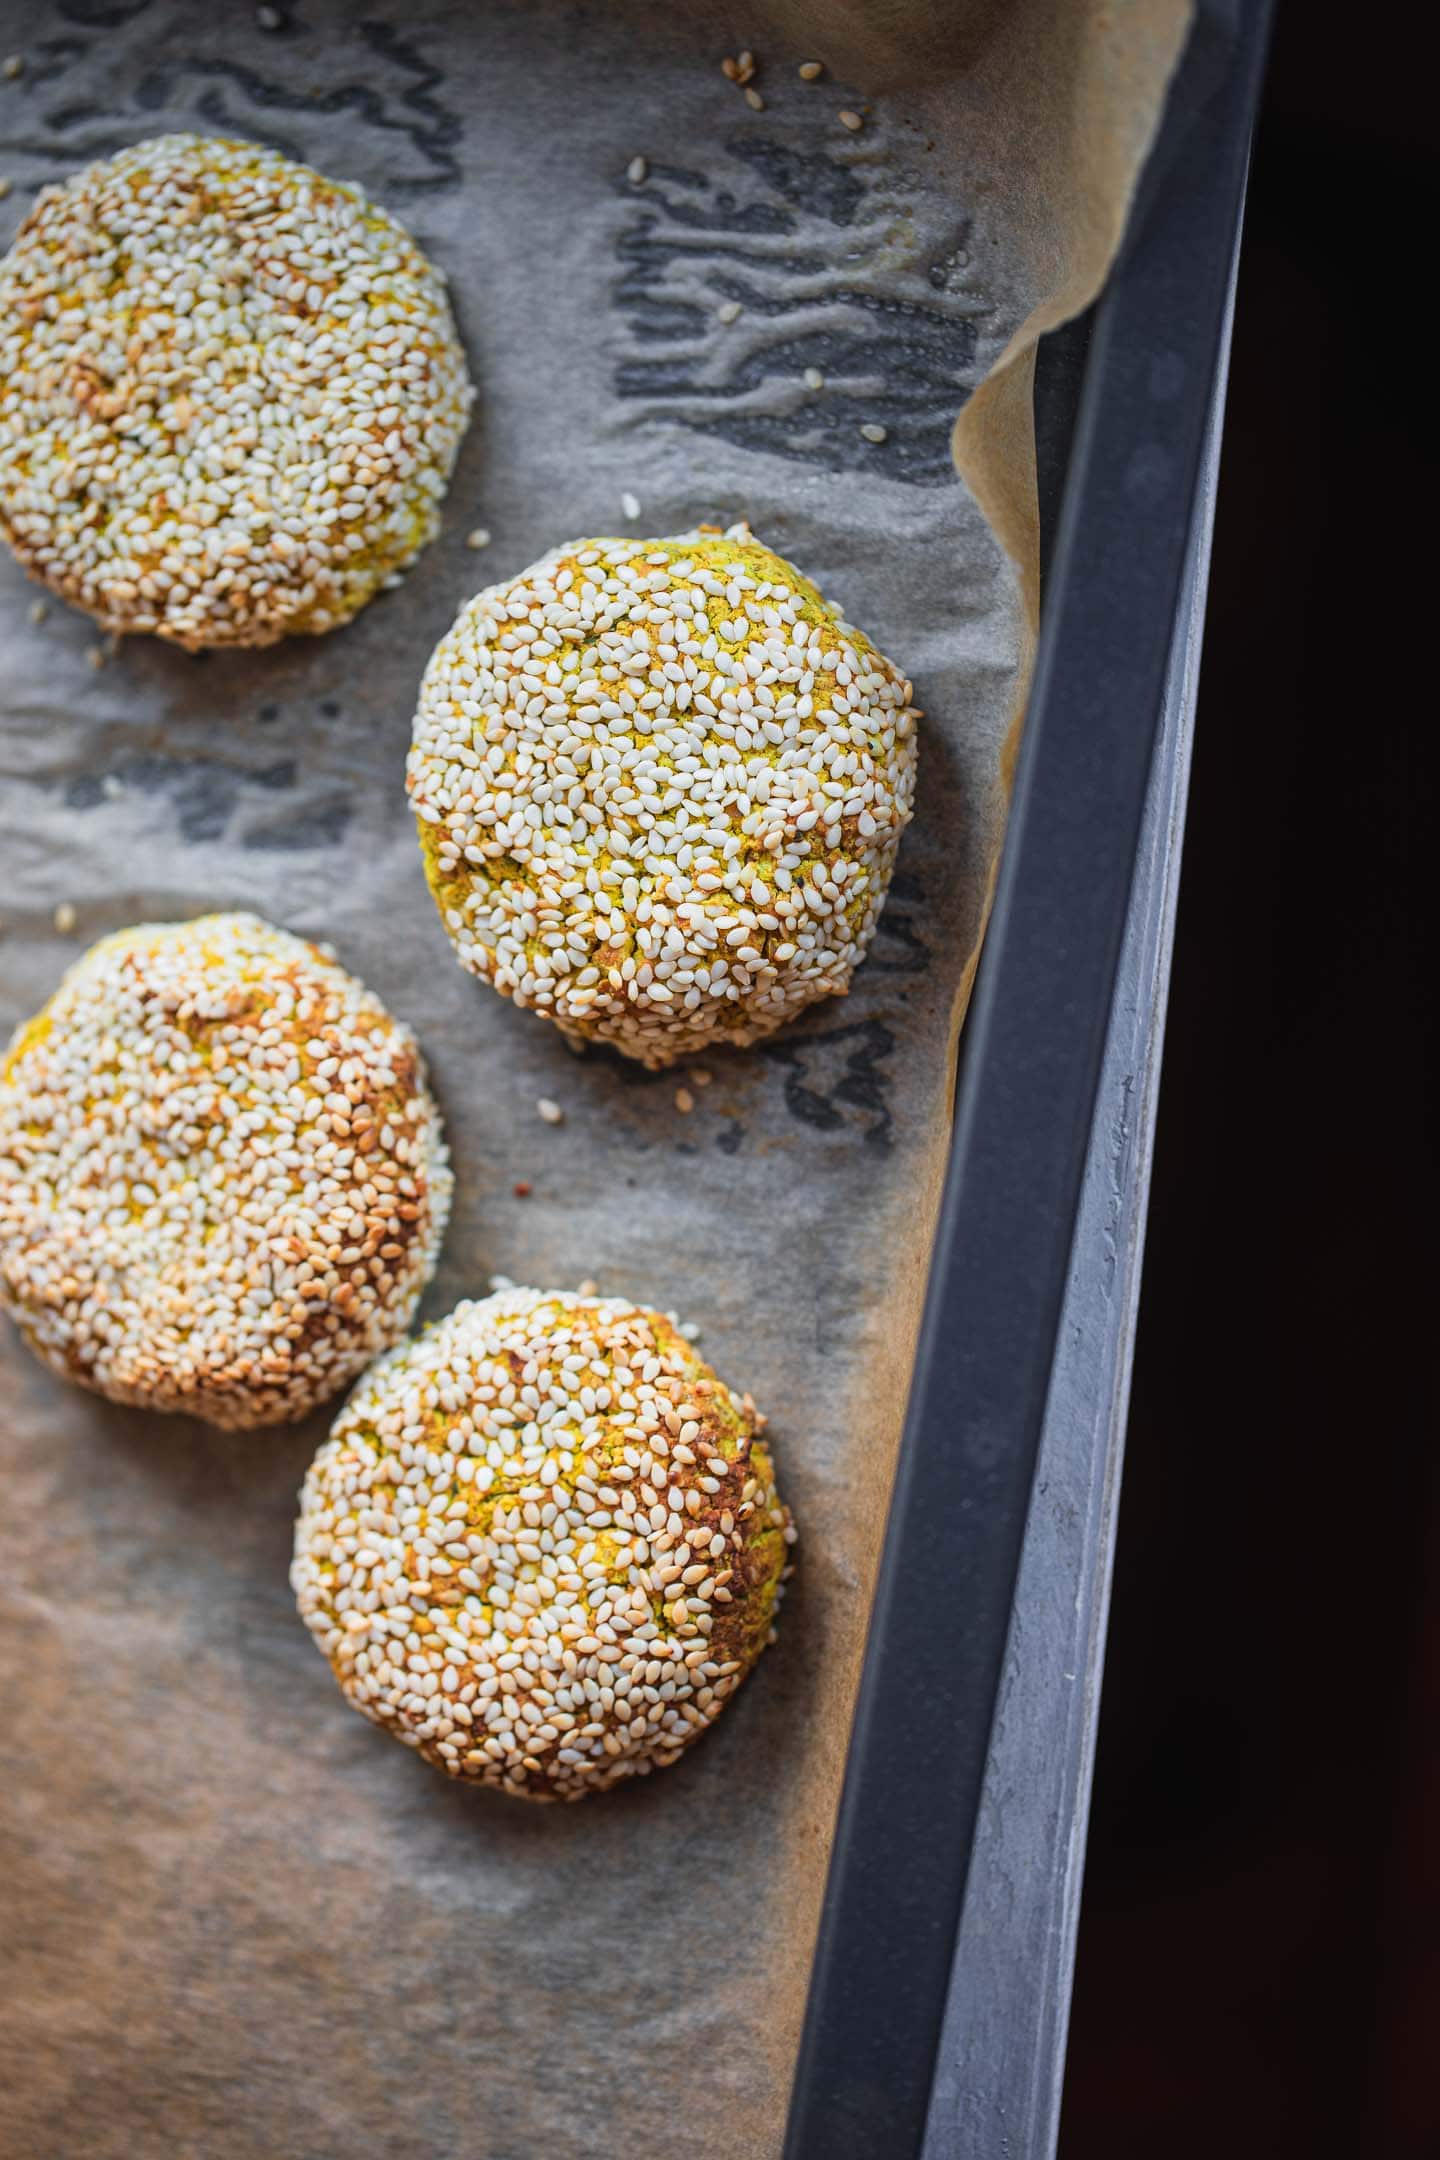 Gluten-free falafel with sesame seeds on a baking tray